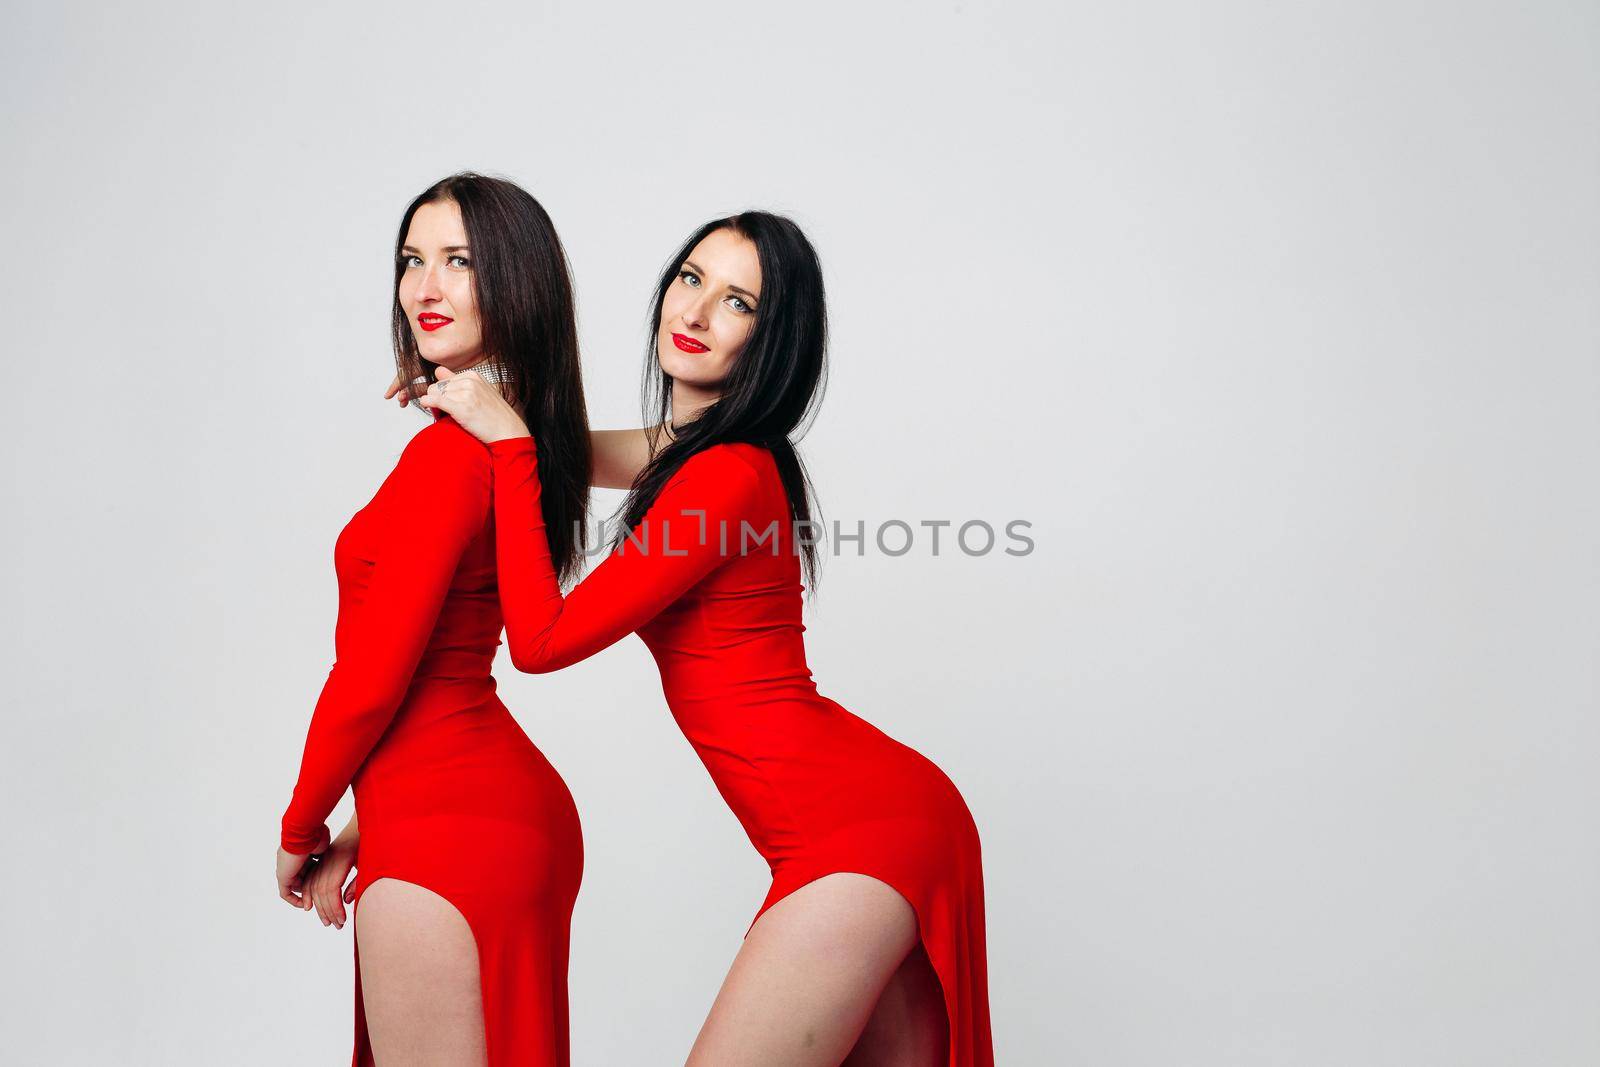 Two sexy and beautiful sisters twins in red dresses posing, looking at camera holding hands up. Pretty dancing ladies with long hair. Fashionable and stylish girls. Shopping, fashion, party.